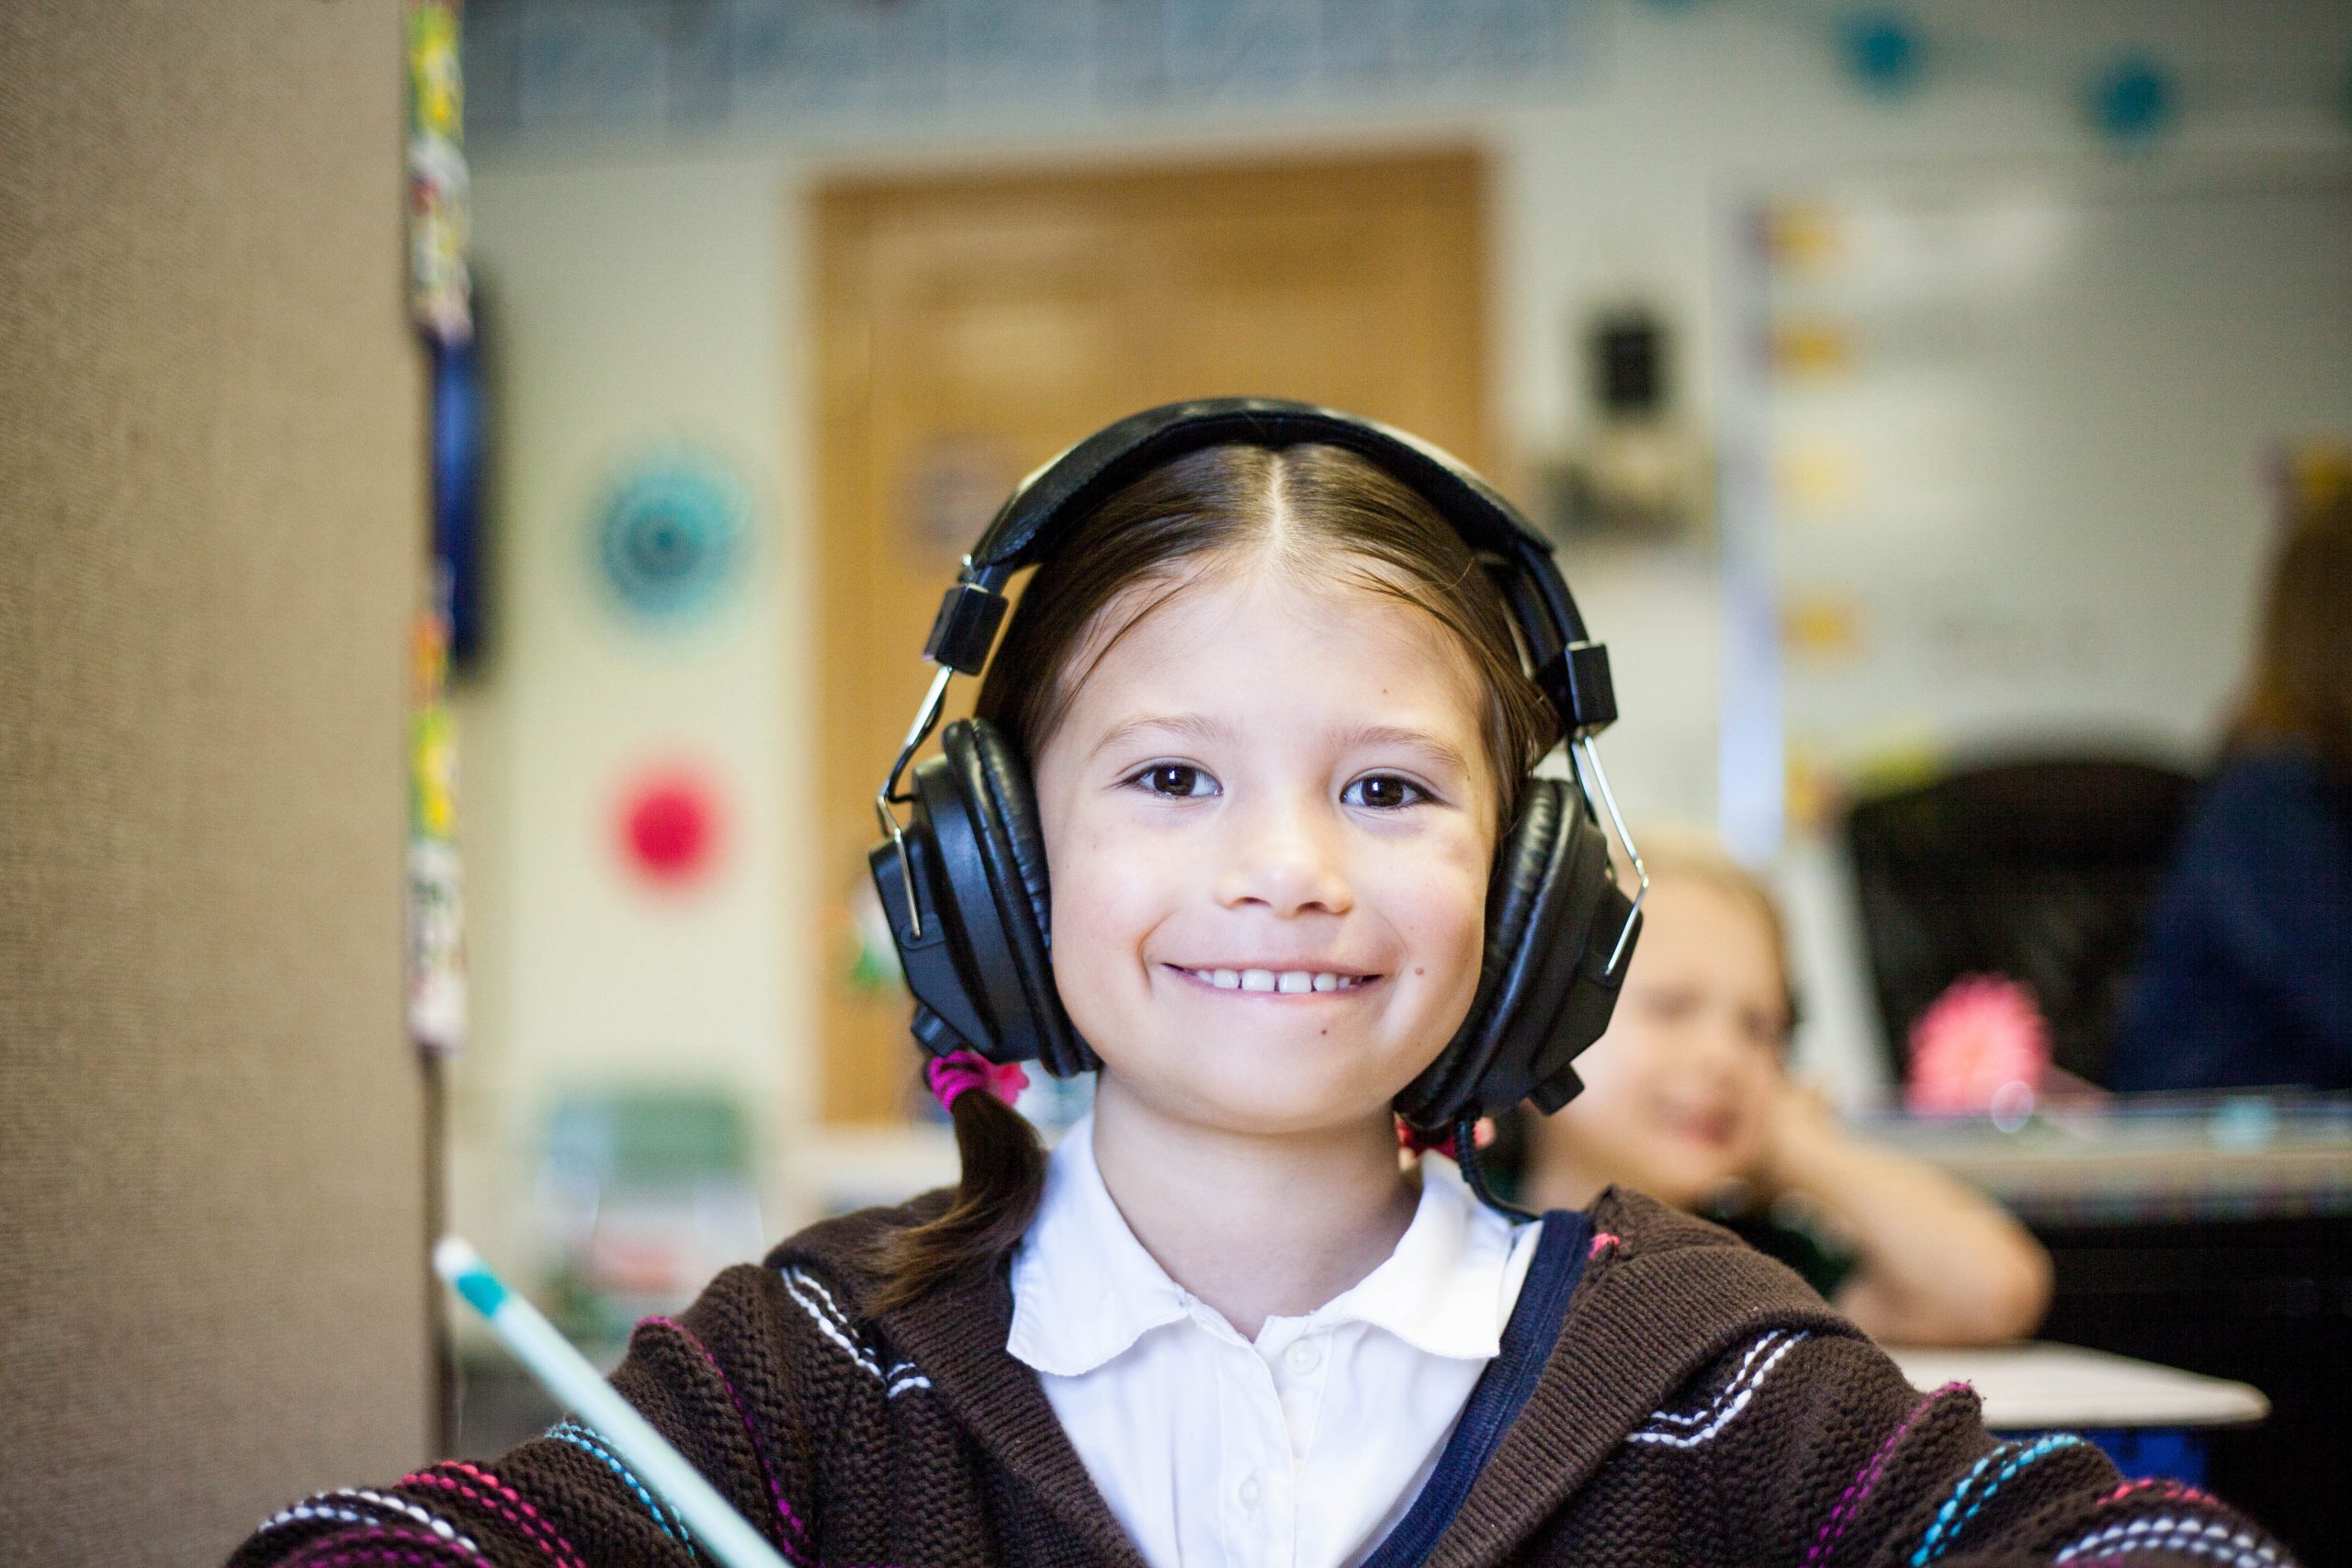 A pupil with headphones on smiles as she uses her laptop in school.